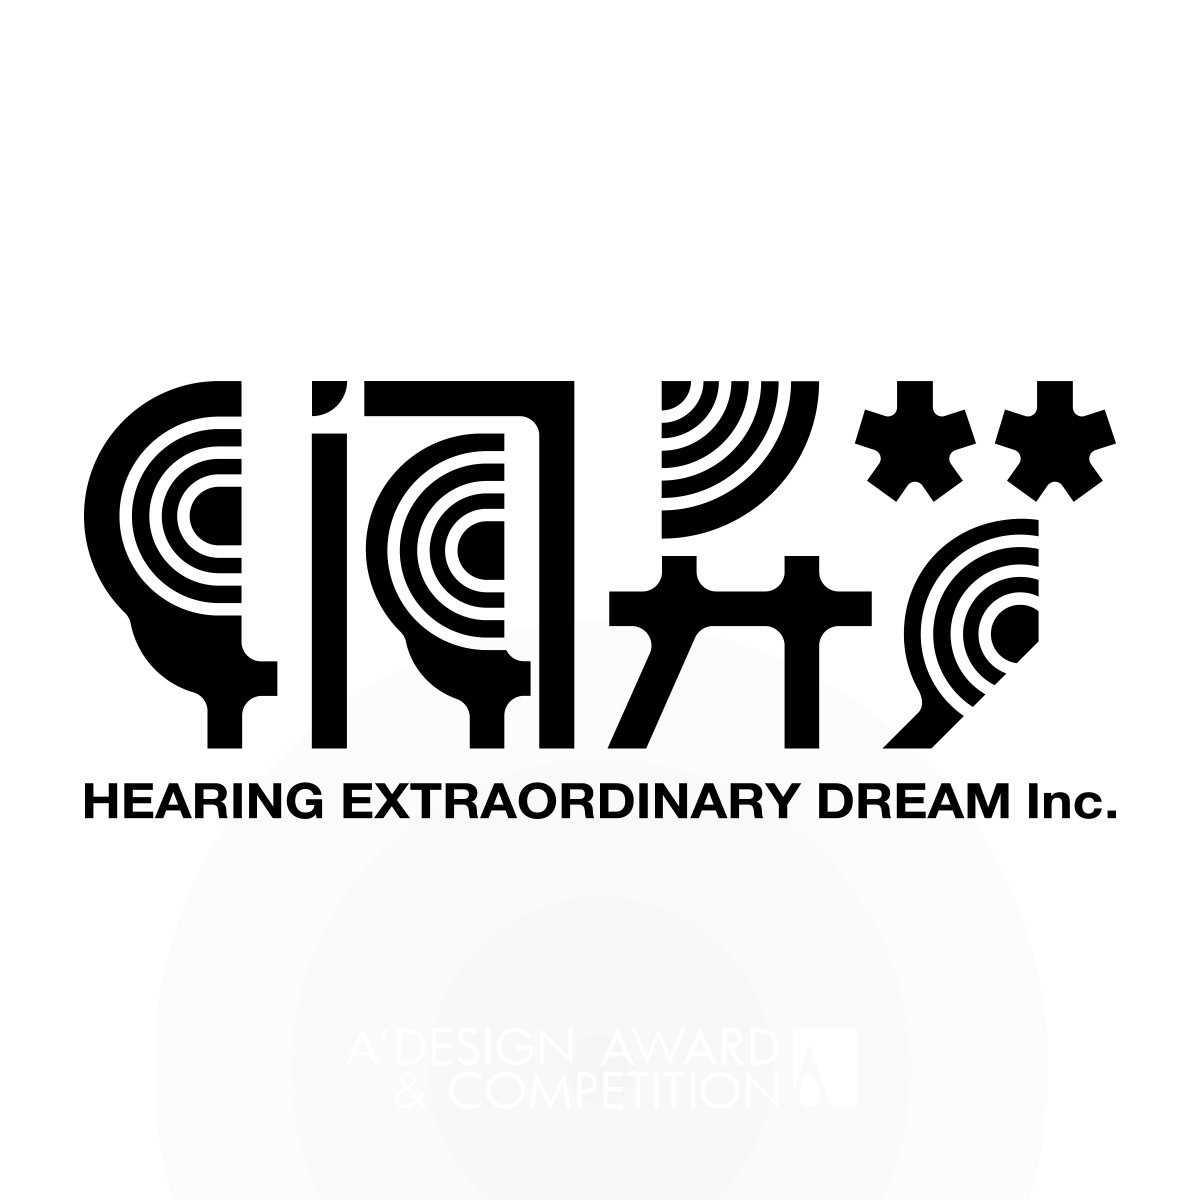 Hearing Extraordinary Dream Logo by Qiuyu Li has been granted the celebrated Bronze A&#039; Design Award